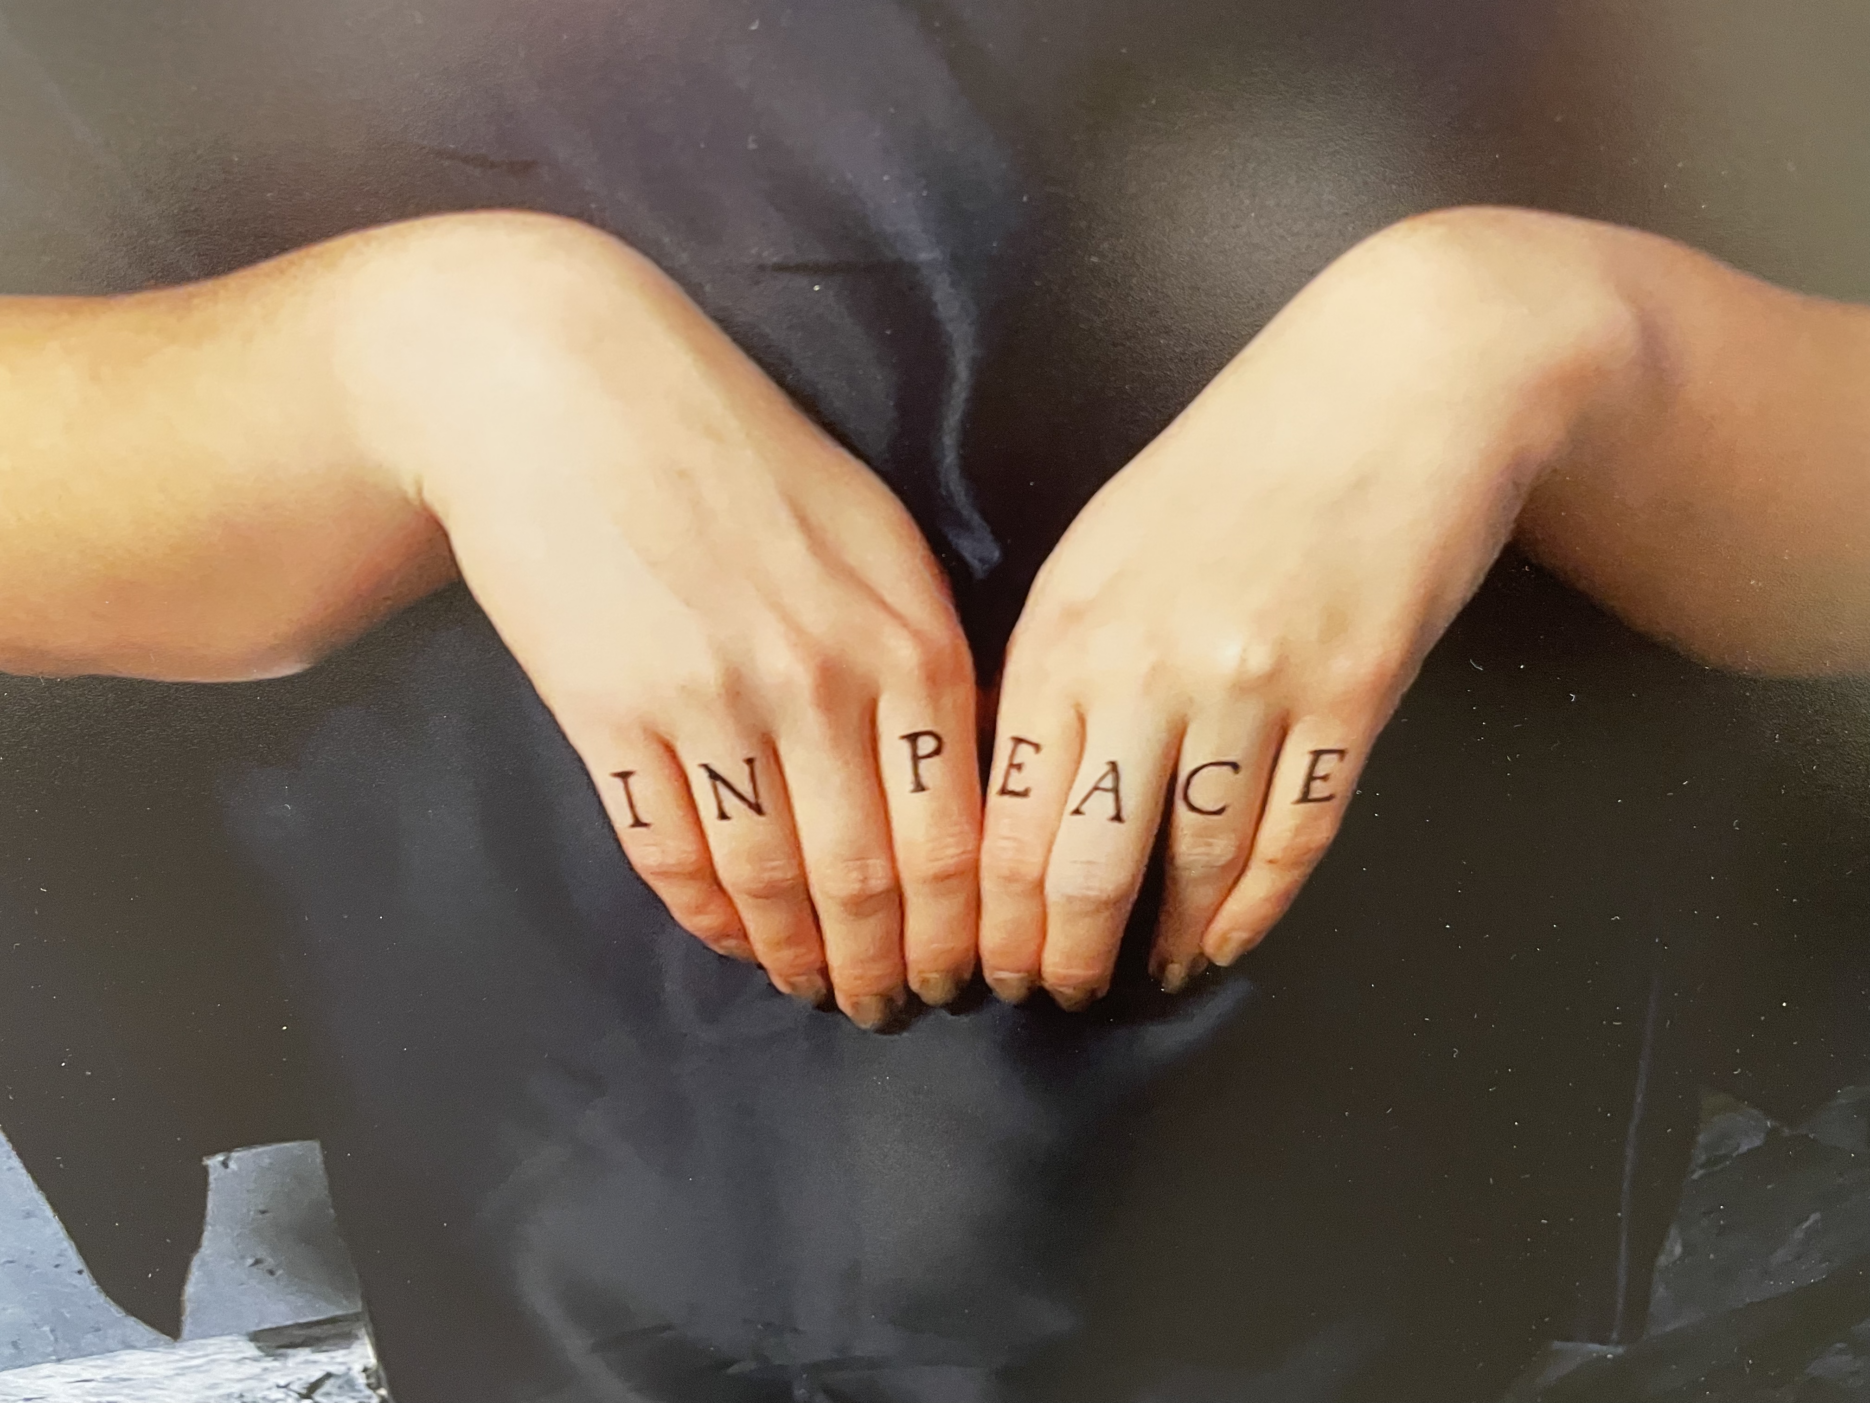 Detail from Jax Ohashi's photo "In Peace," showing a close-up of someone's hands with the letters IN PEACE written across the knuckles.